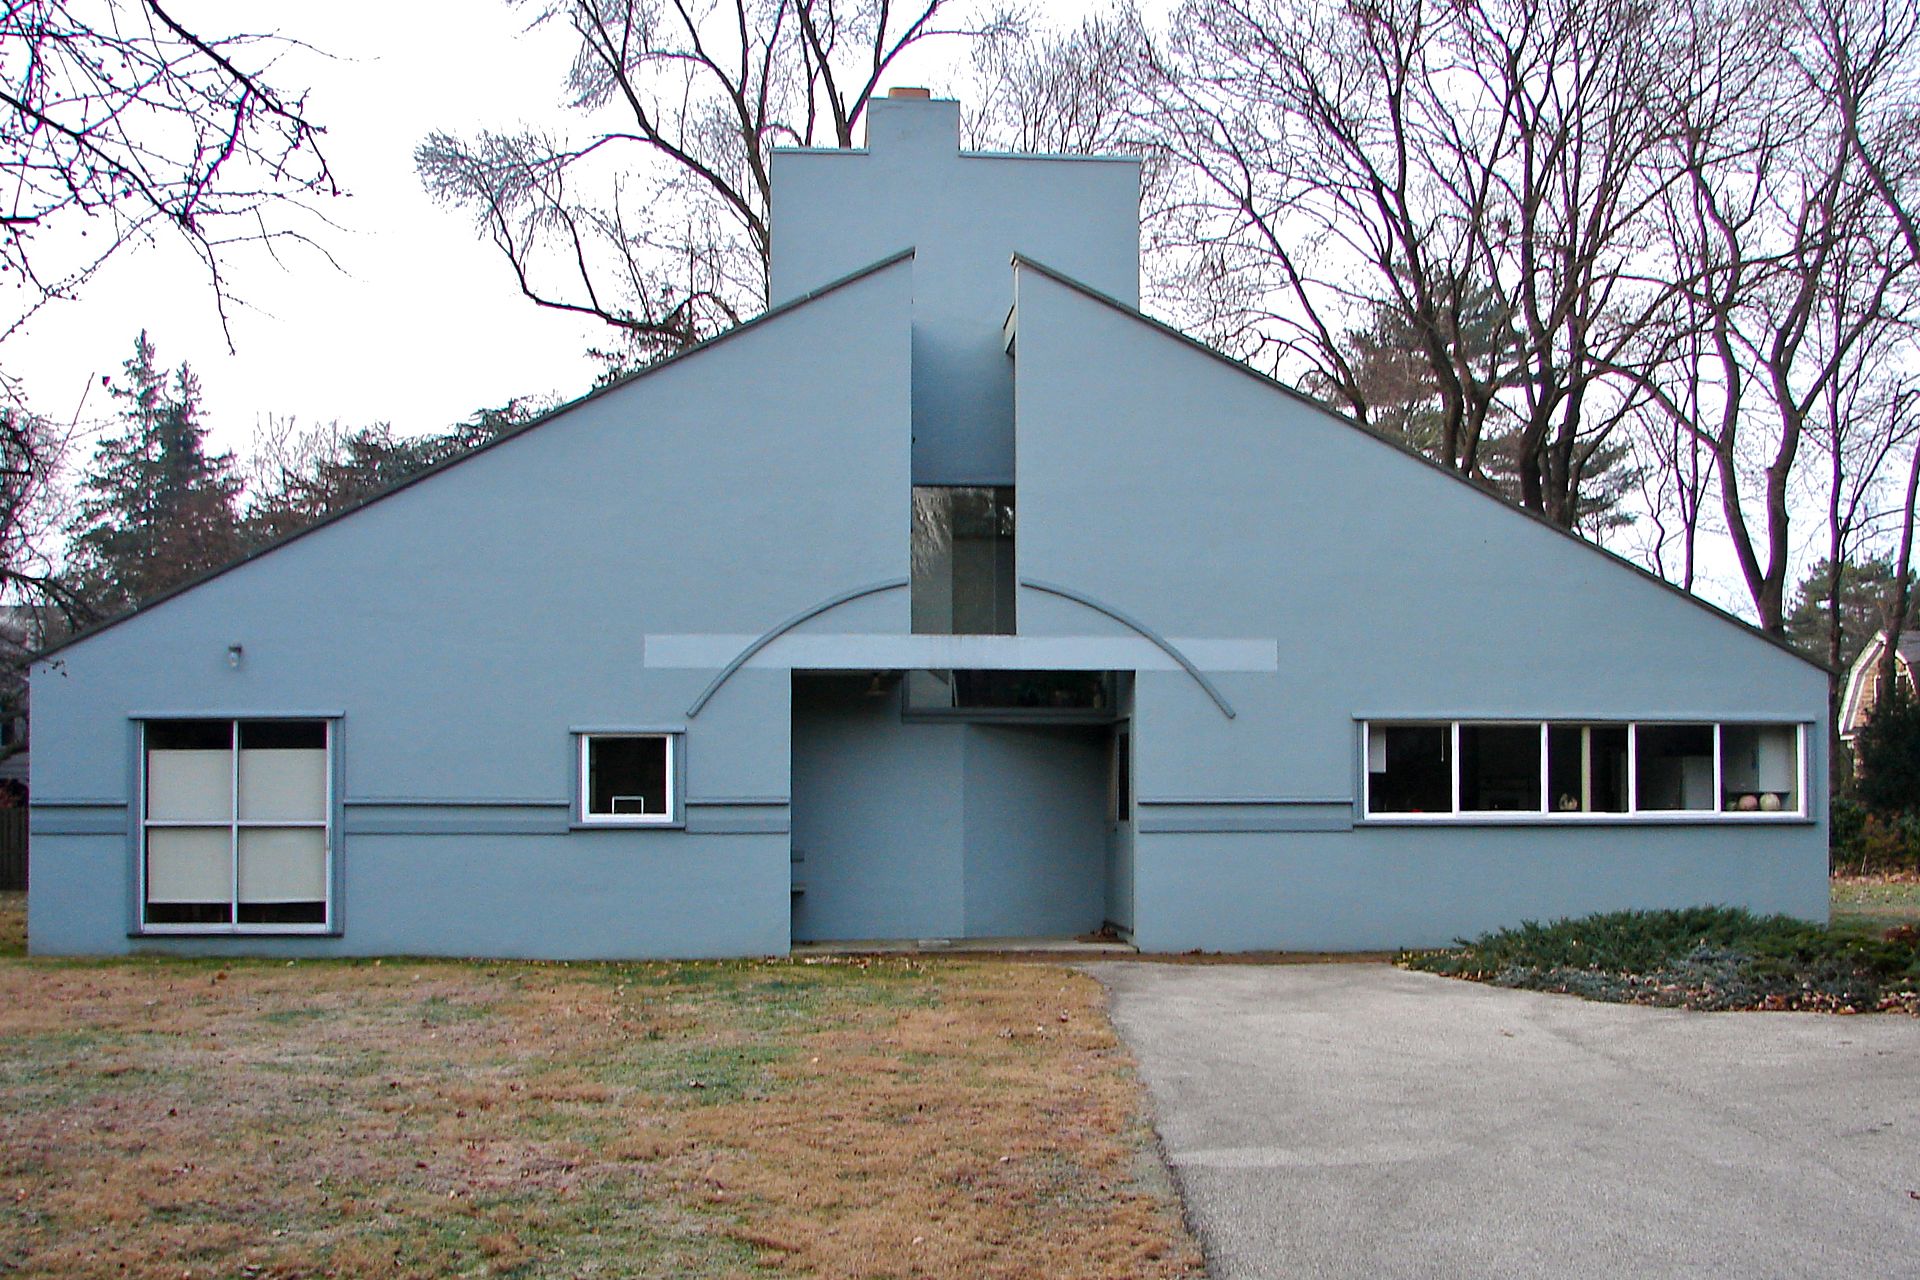 The Subsects of Modernist Architecture, Part IV